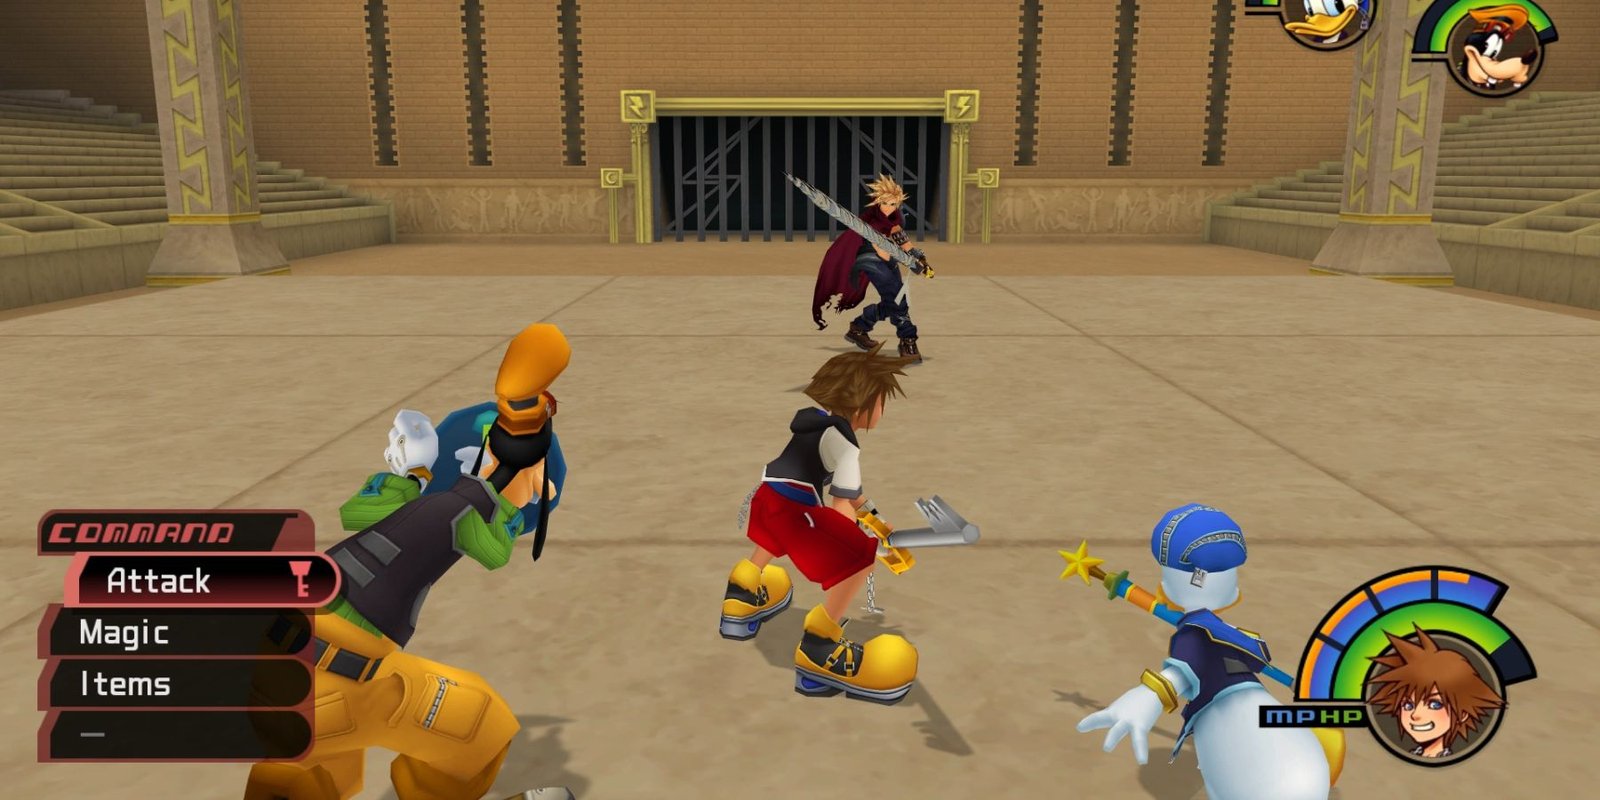 Sora, Donald, and Goofy face Cloud in Kingdom Hearts 1